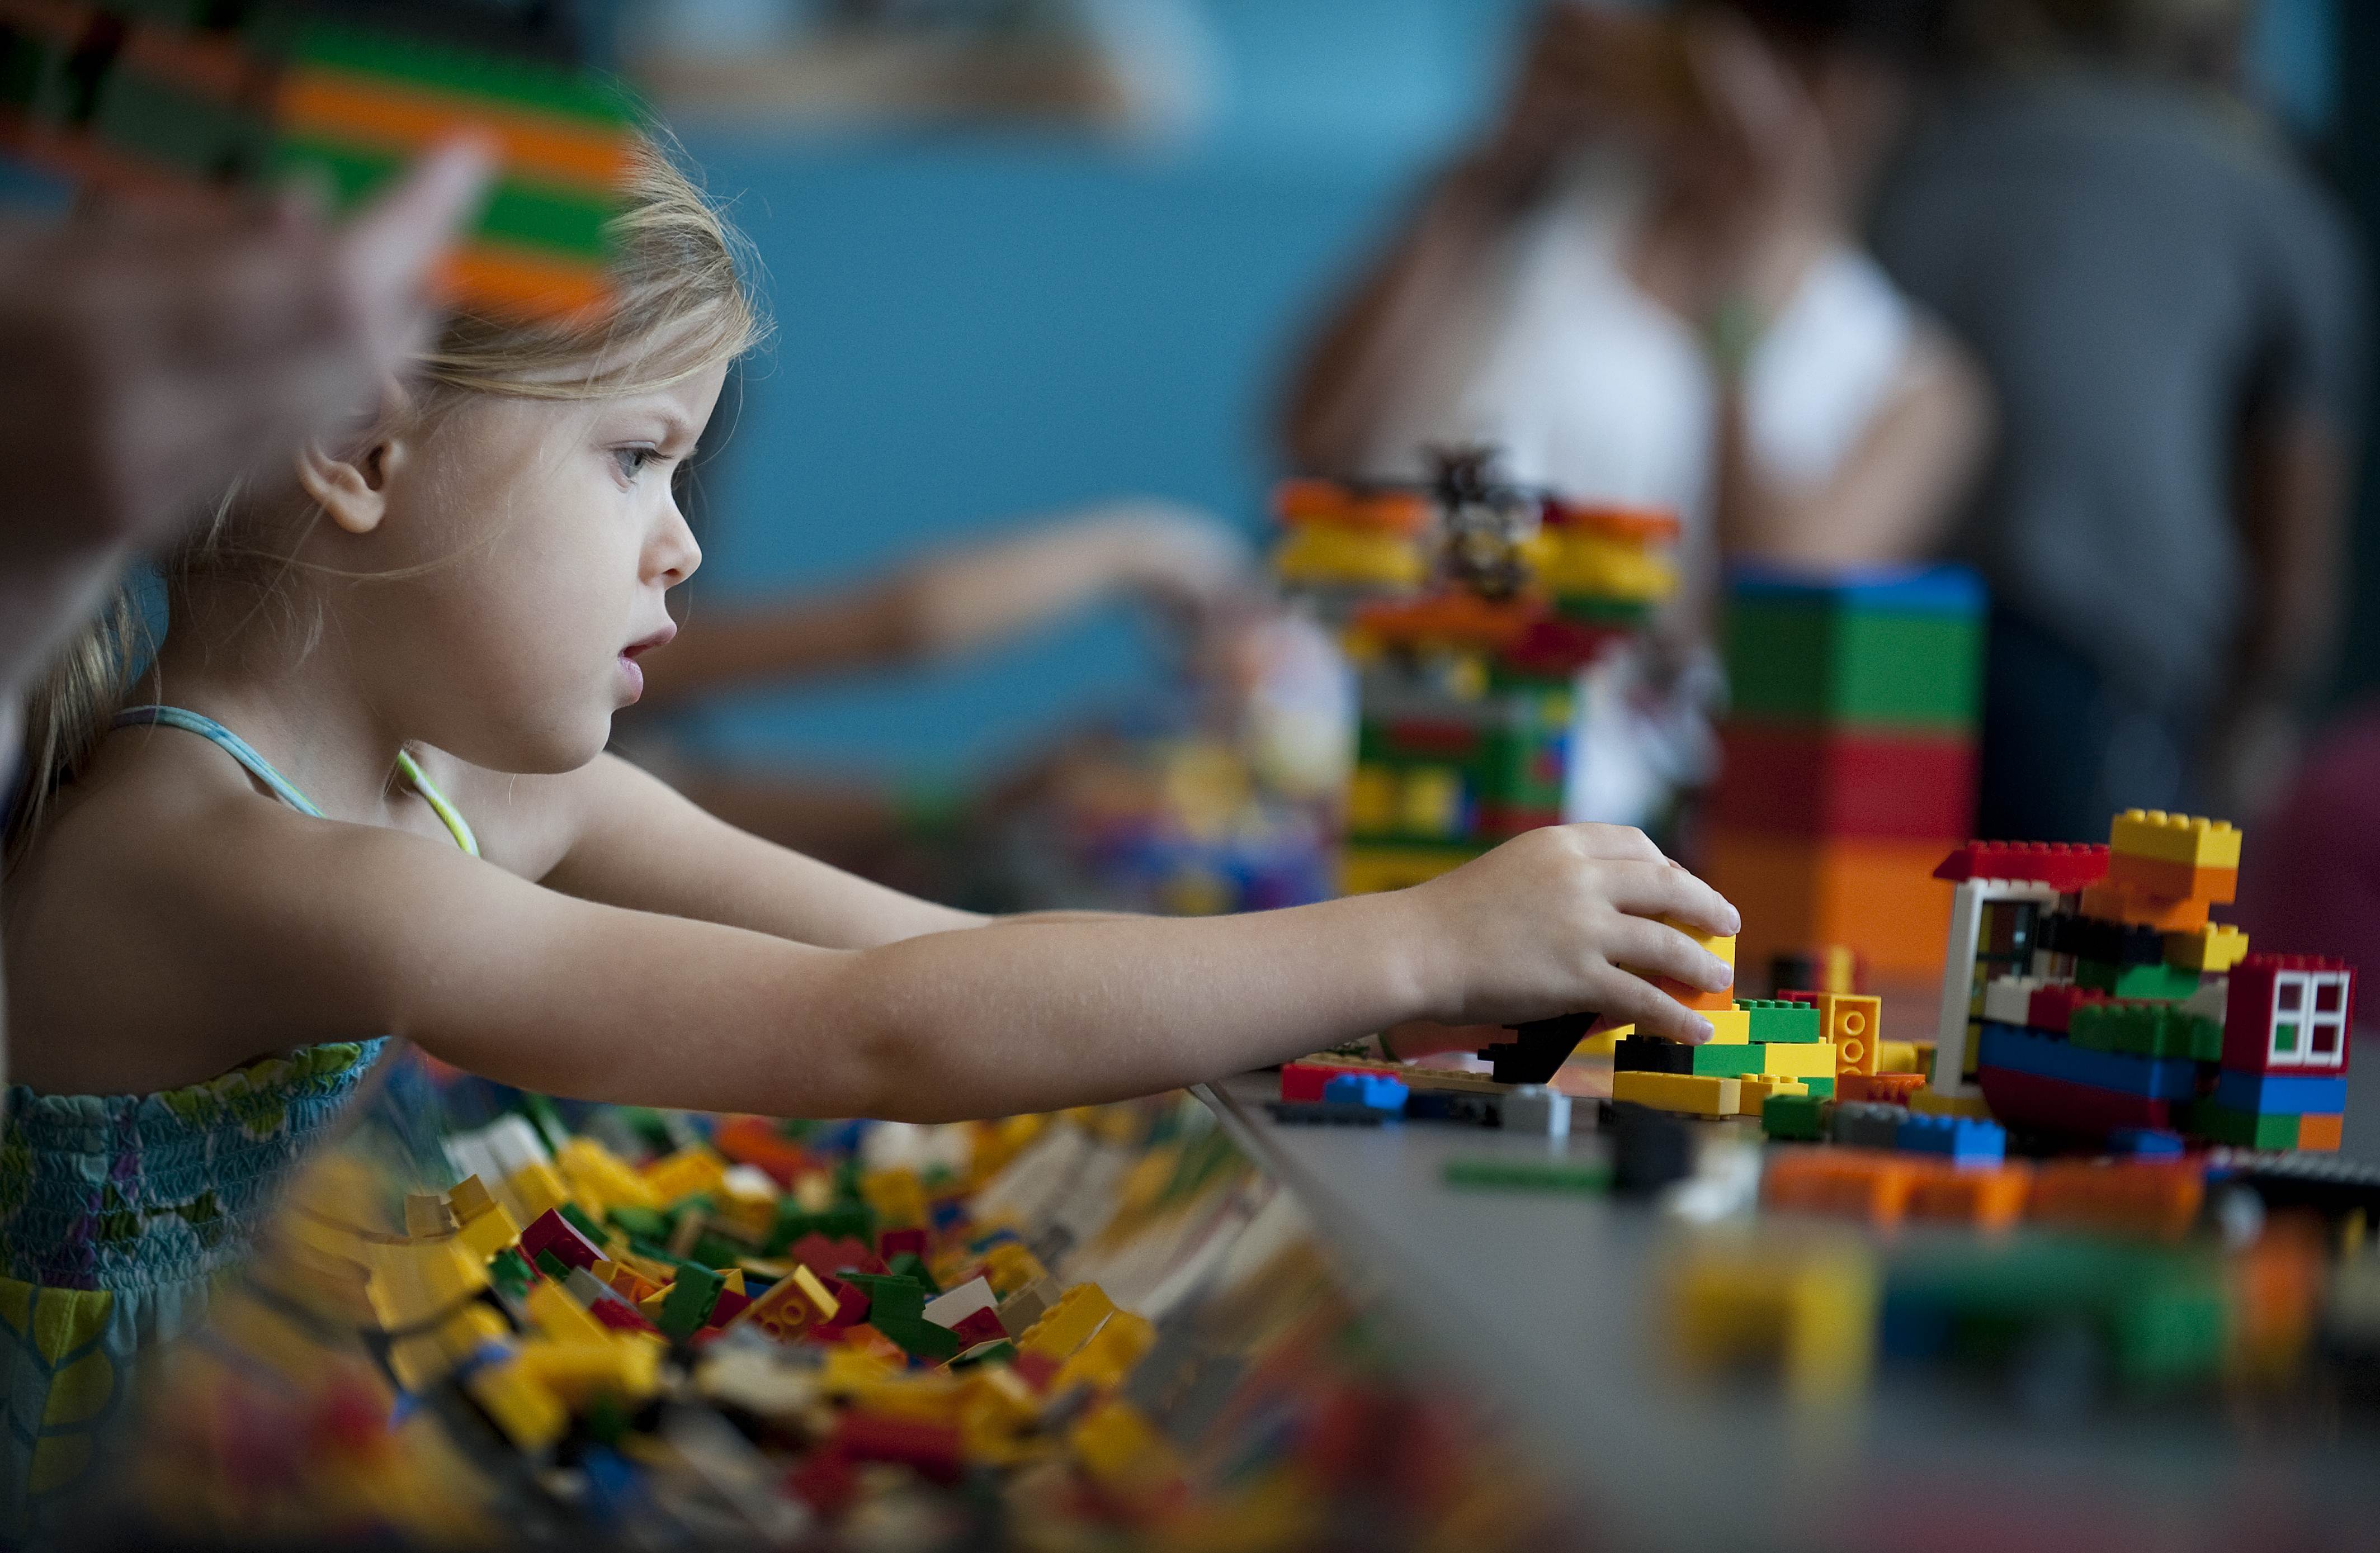 A child plays with Lego building blocks in 2010. (Jim Watson—AFP/Getty Images)